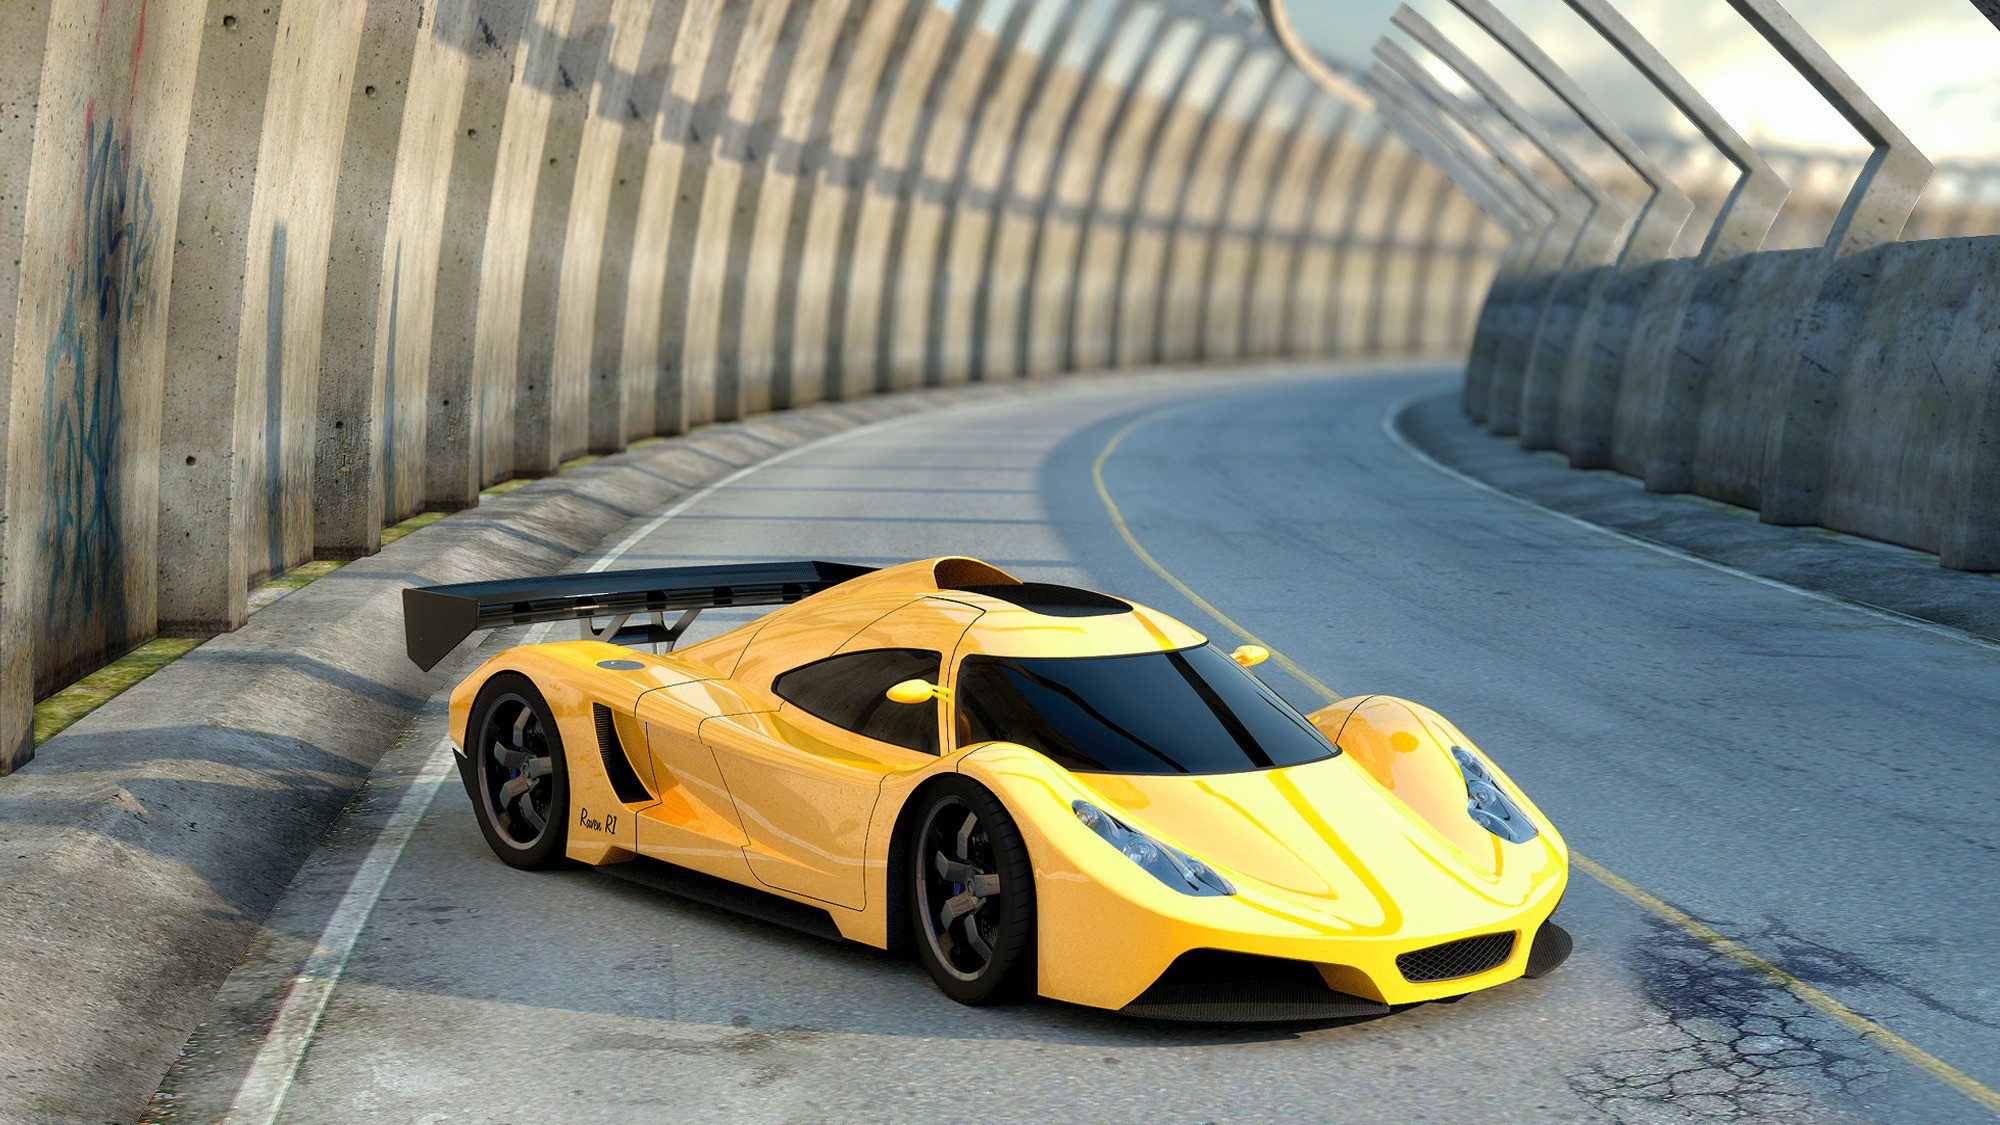 Cool Wallpapers vehicles, hennessey